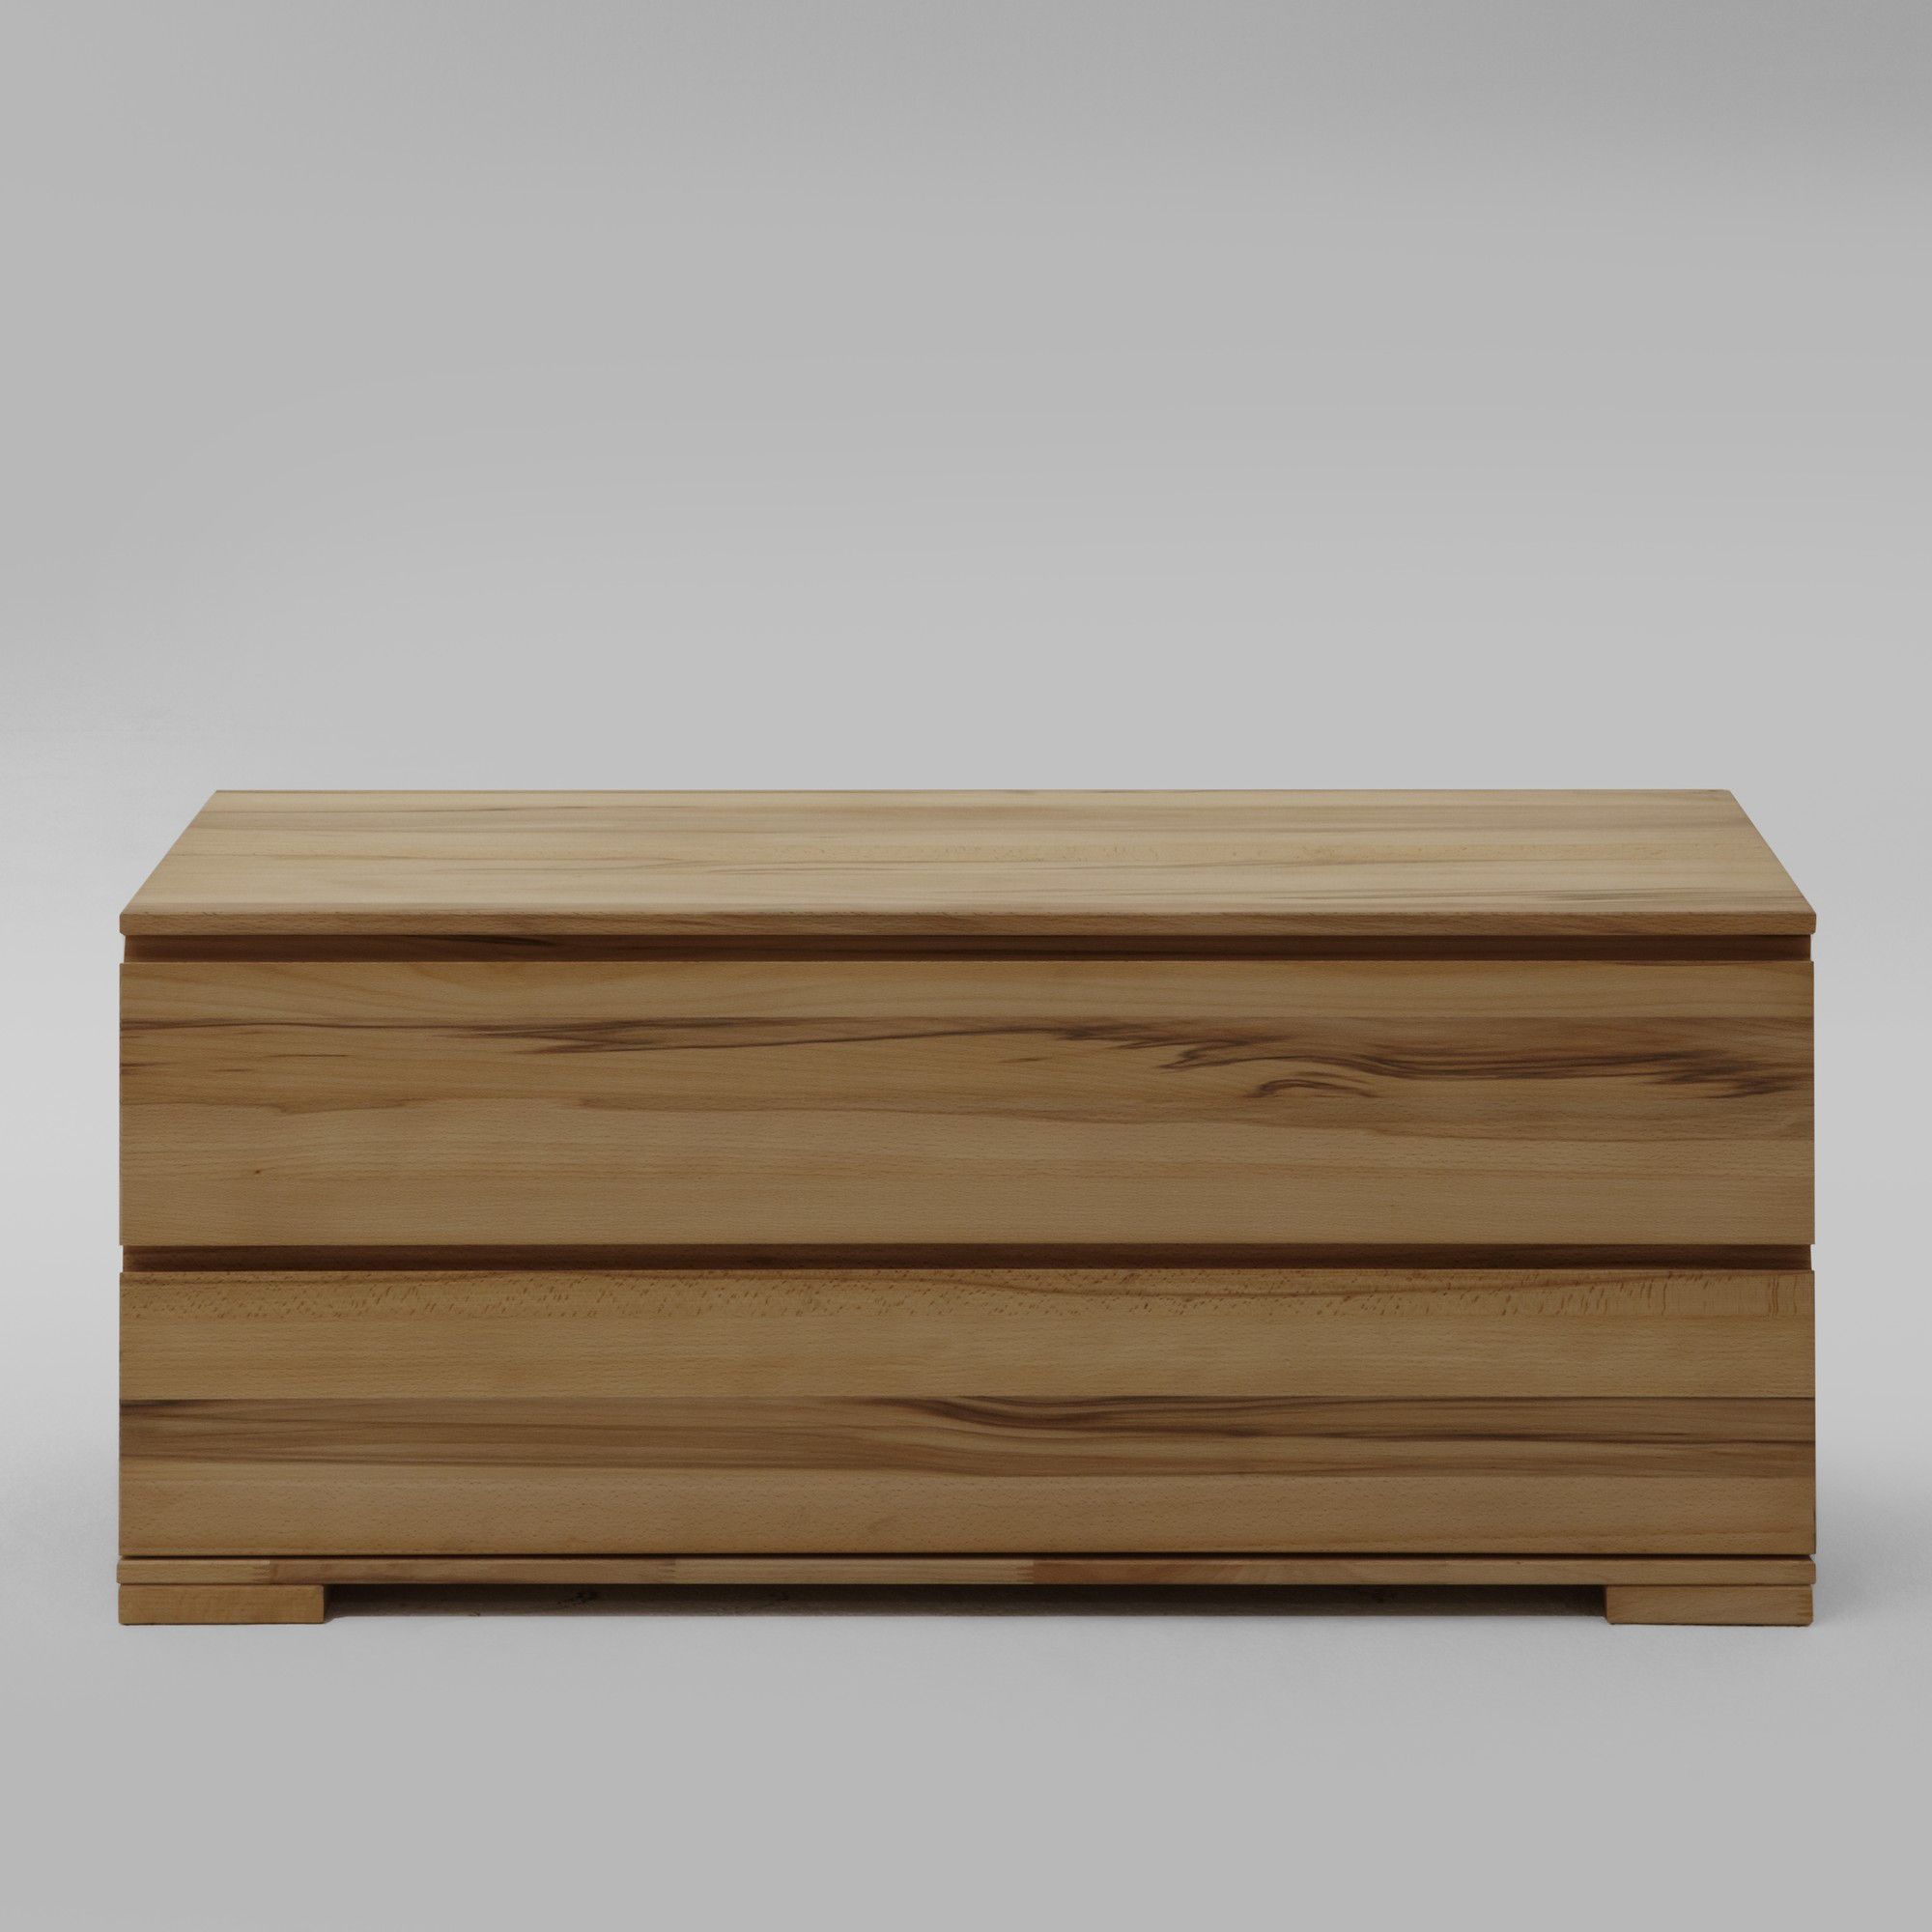 Oestergaard More Mille Chest of Drawers - 44,5cm at Tesco Direct